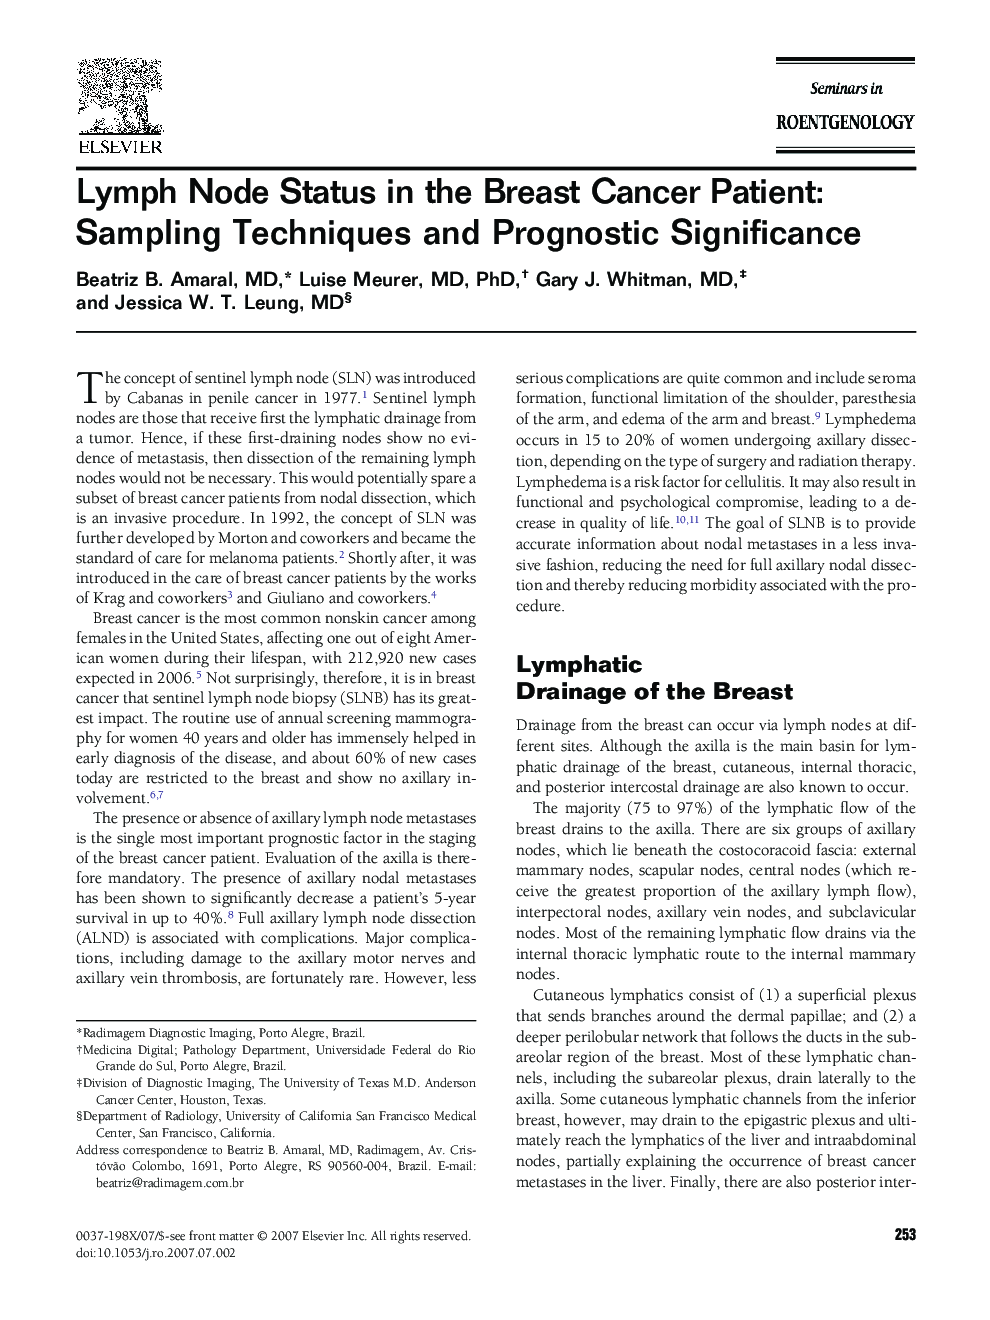 Lymph Node Status in the Breast Cancer Patient: Sampling Techniques and Prognostic Significance